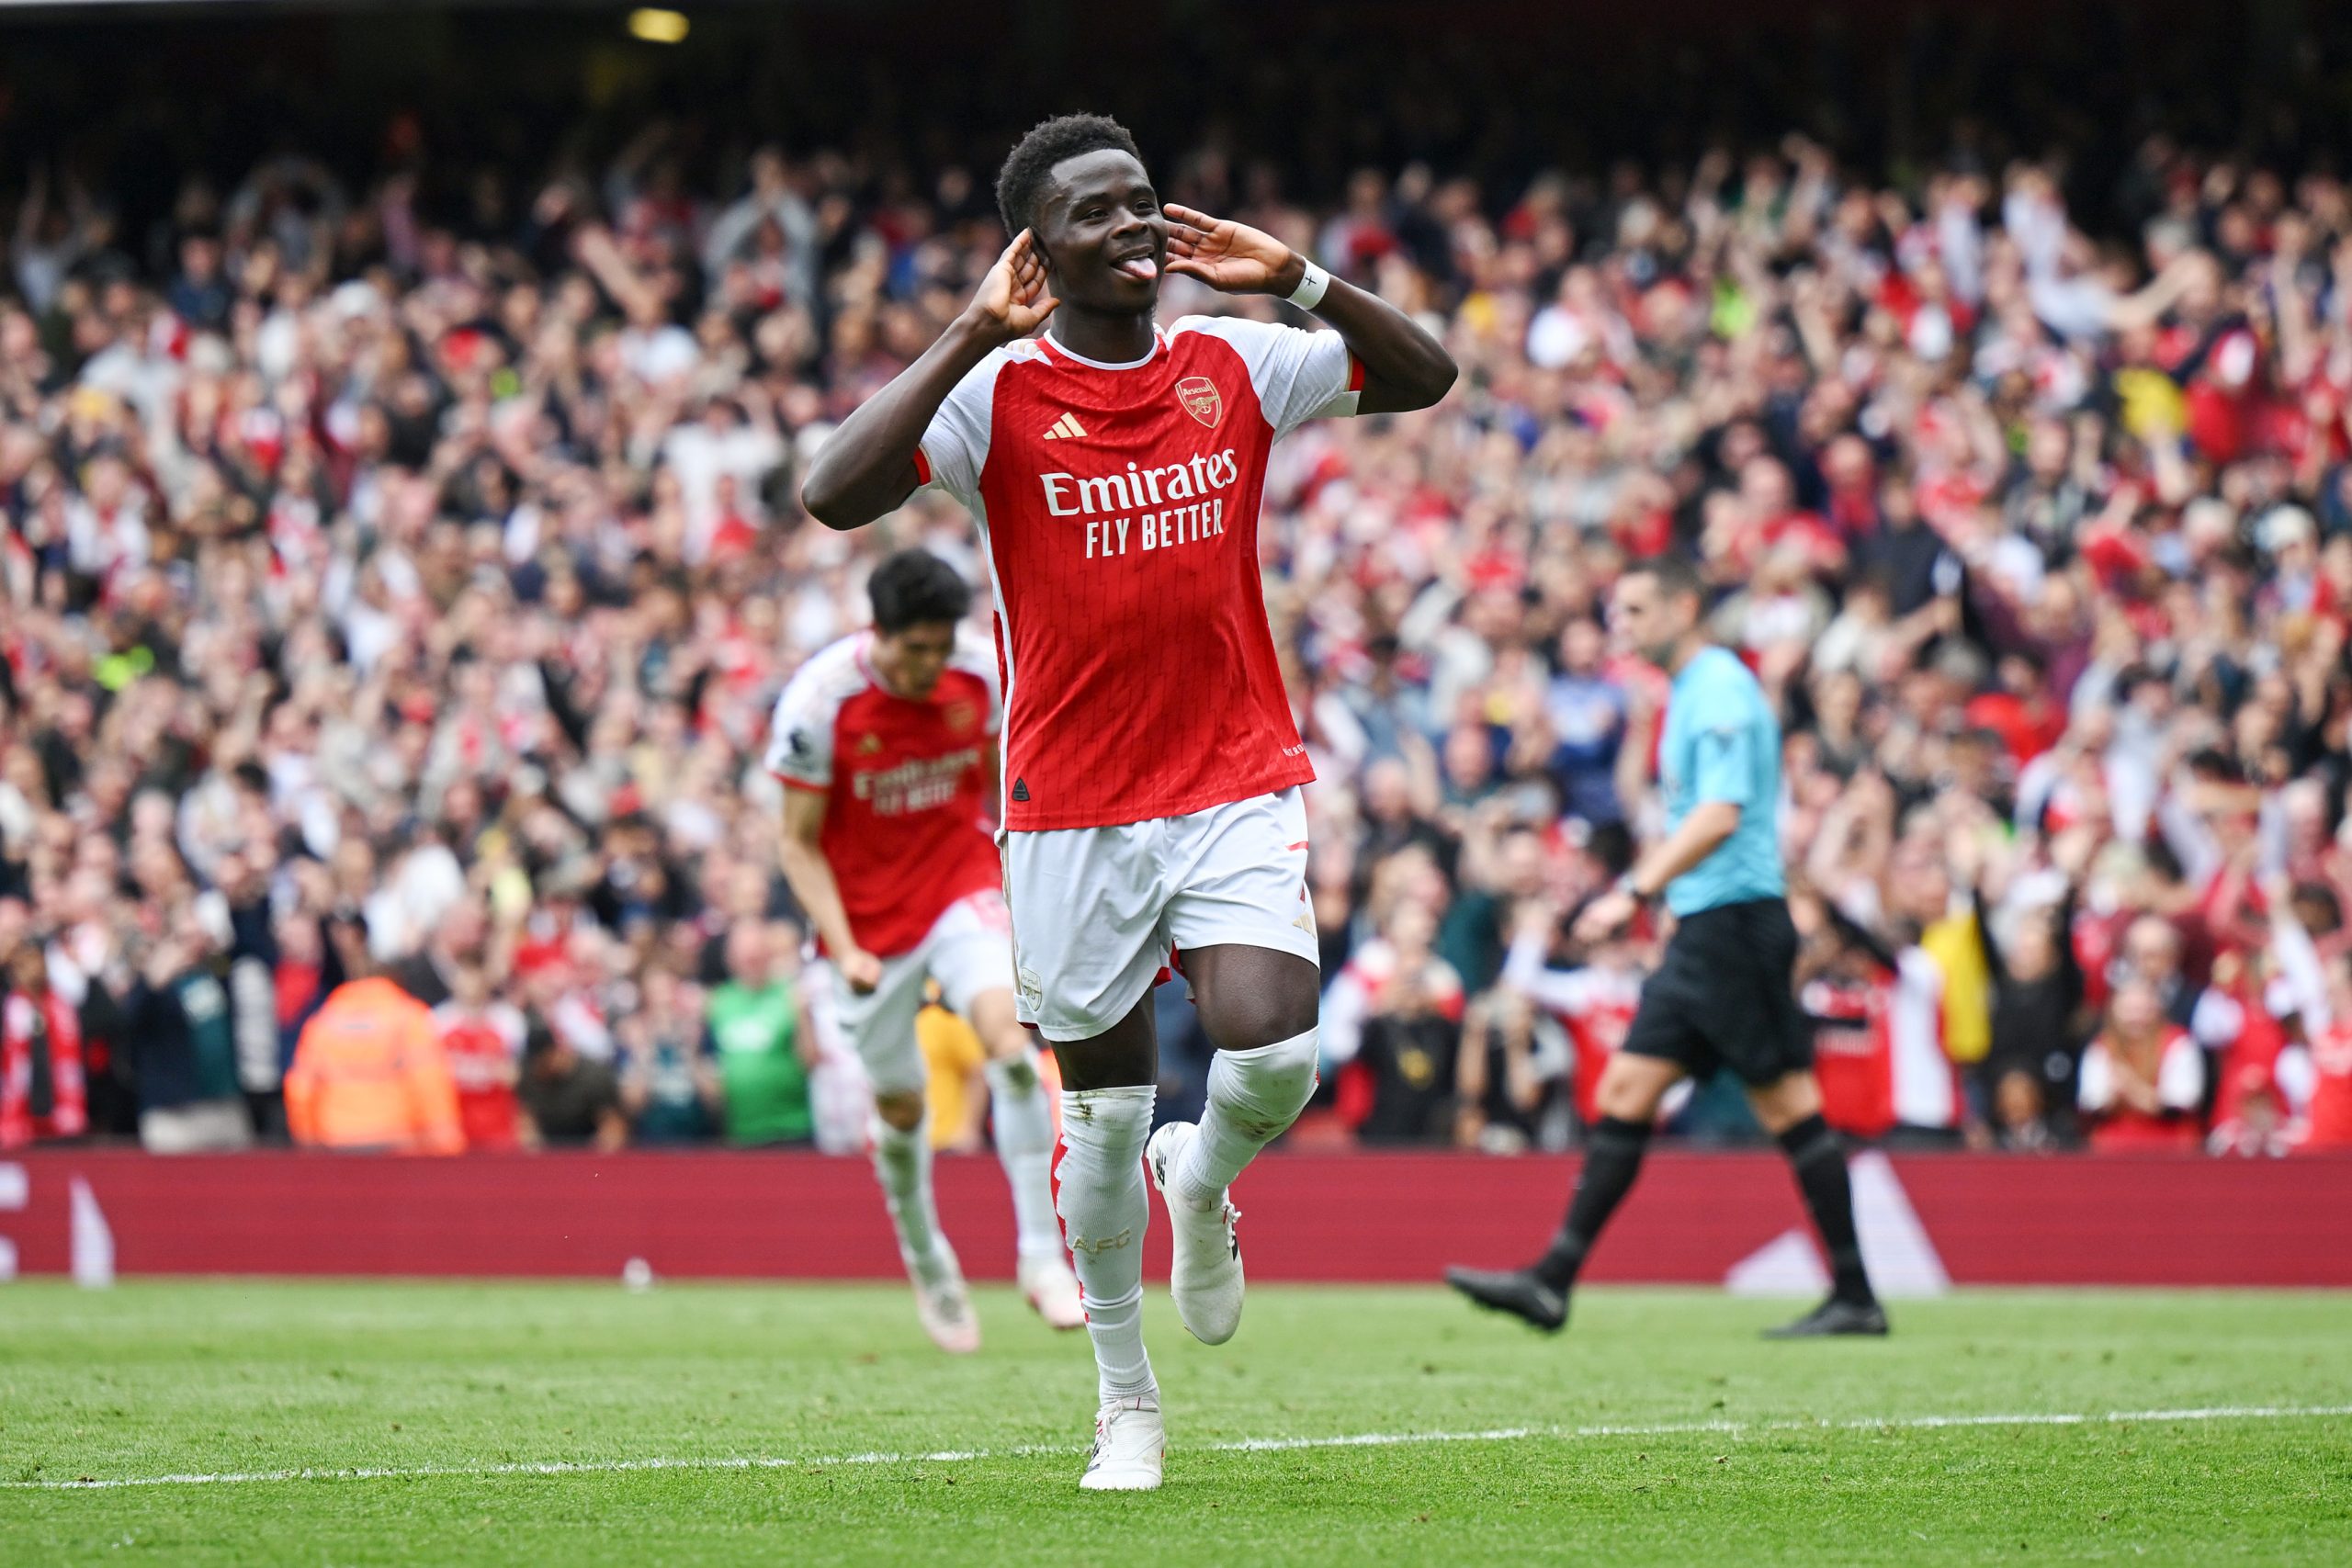 Arsenal keeps top spot in EPL, scoring three goals past Bournemouth